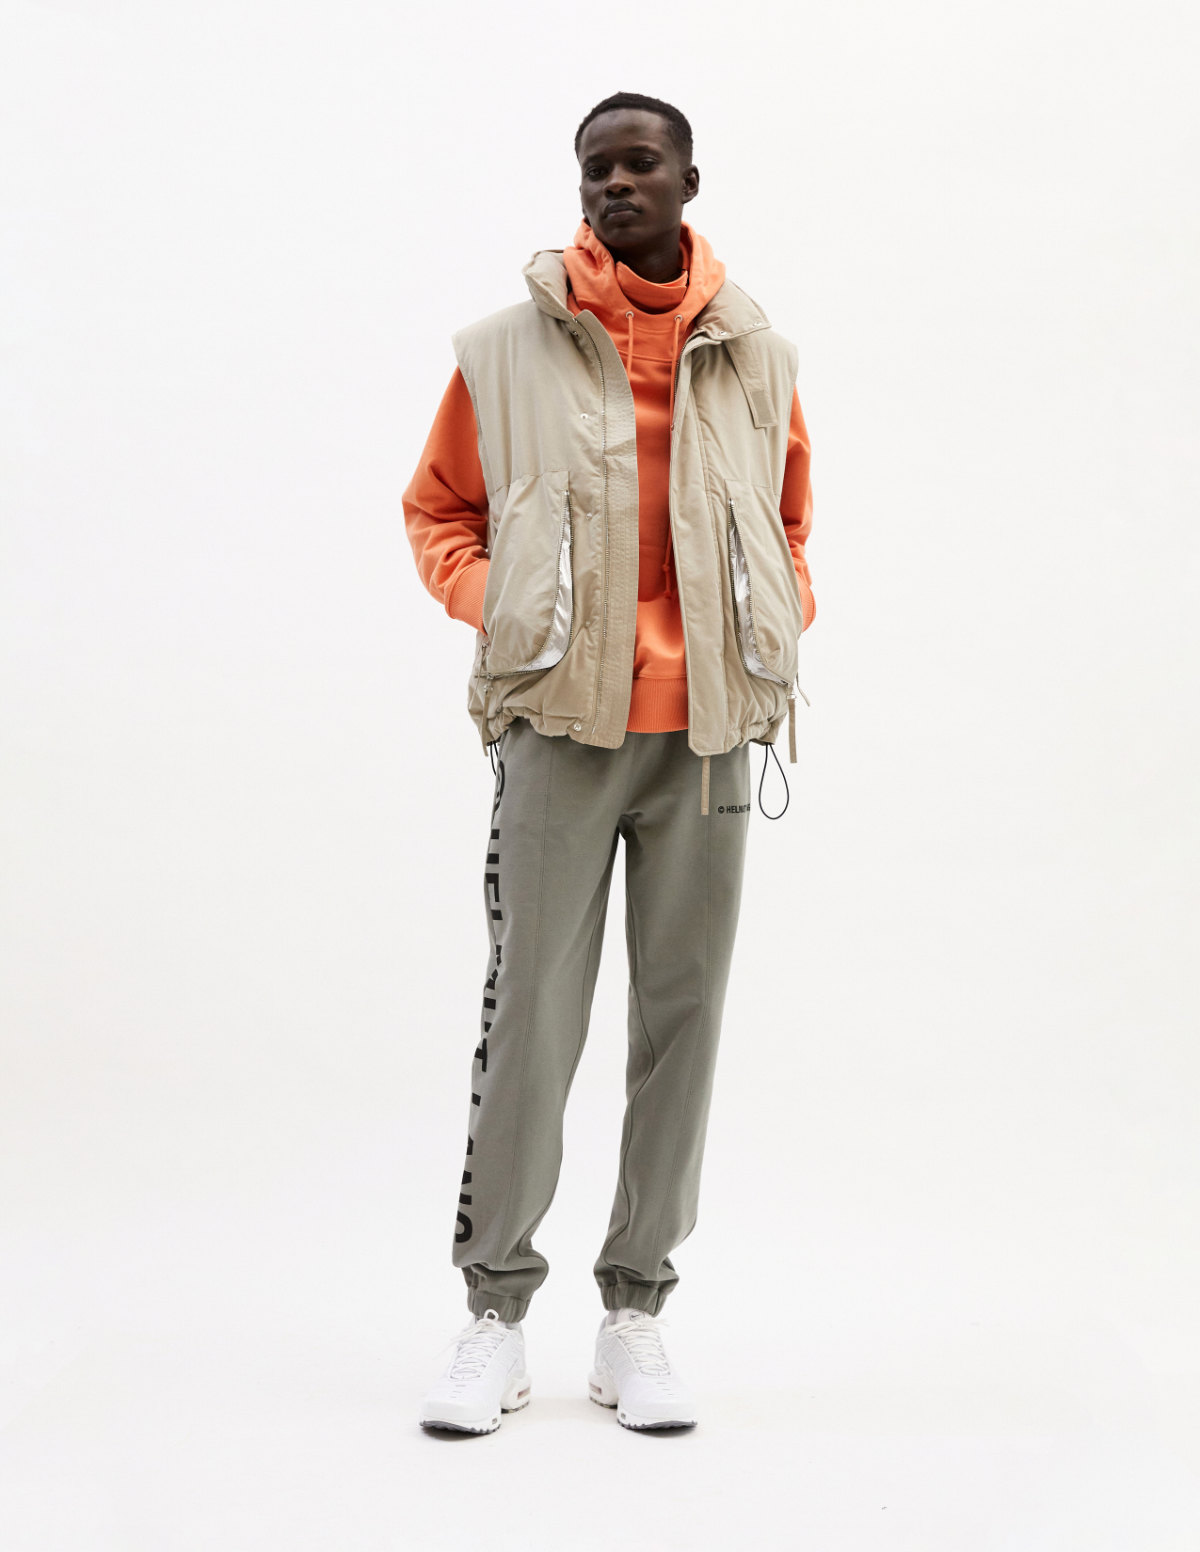 Helmut Lang’s Autumn/Winter 2021 Collection